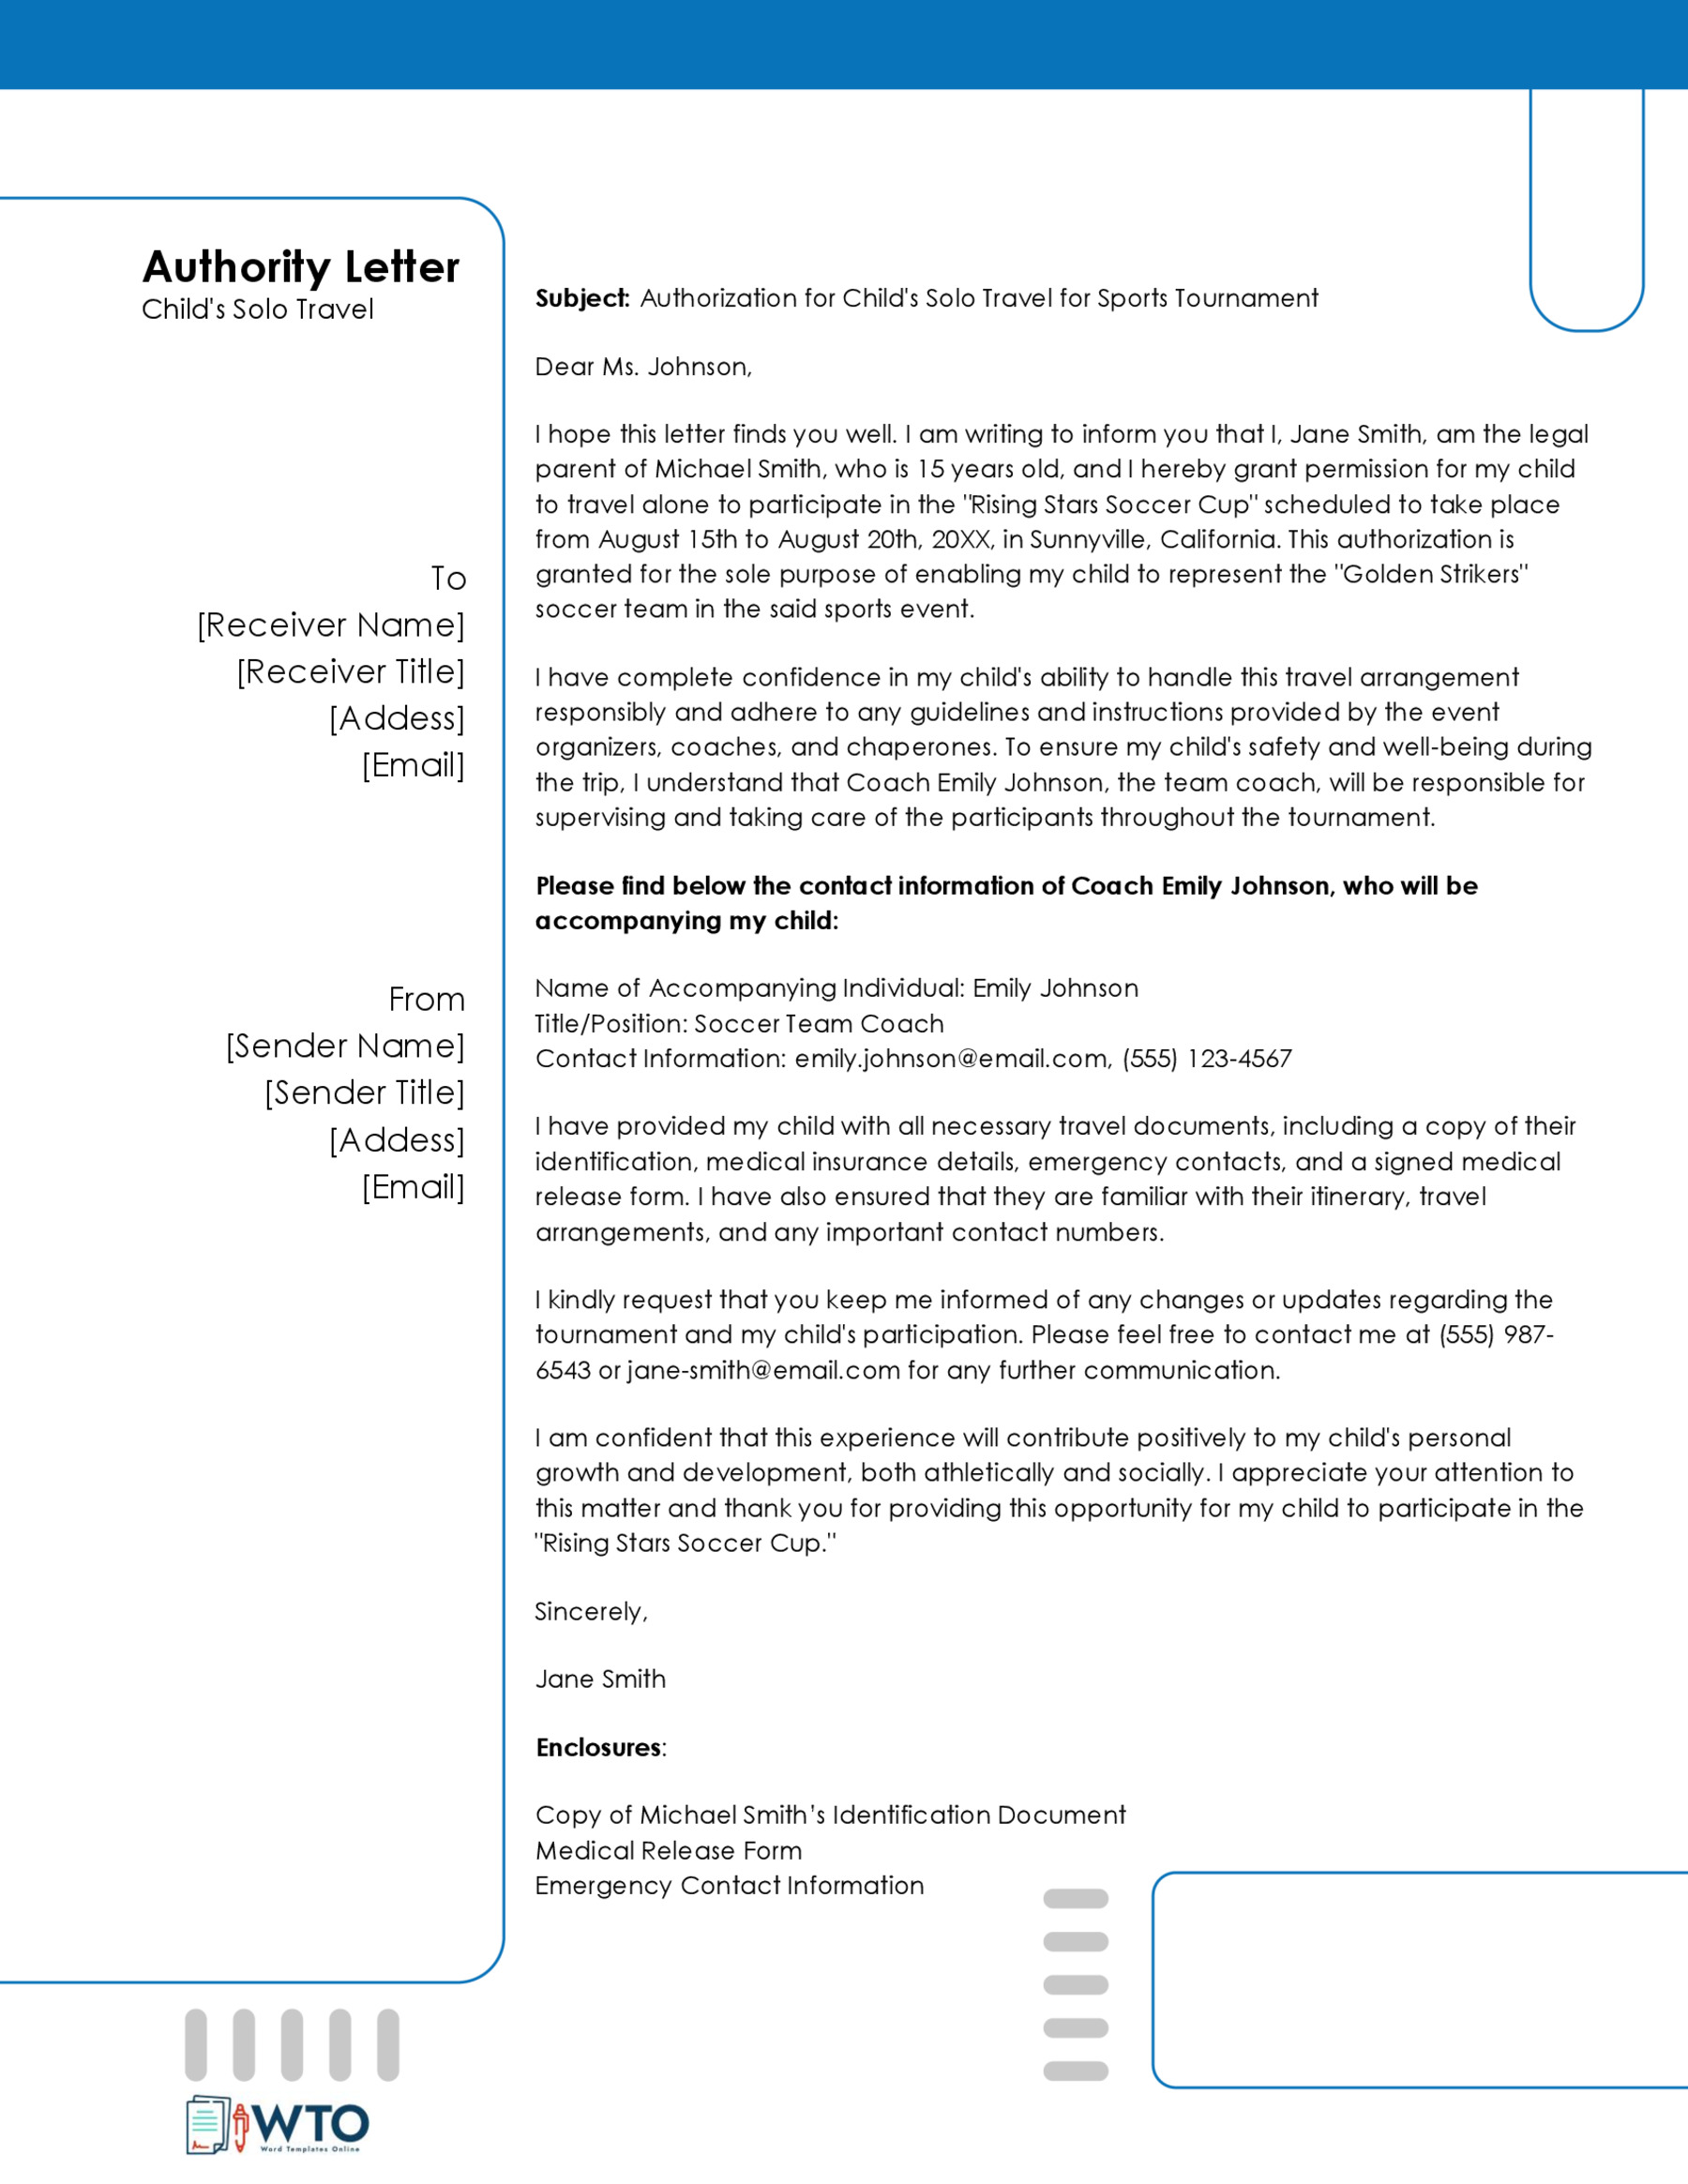 Sample Authorization Letter for a Child to Travel Alone-Downloadable